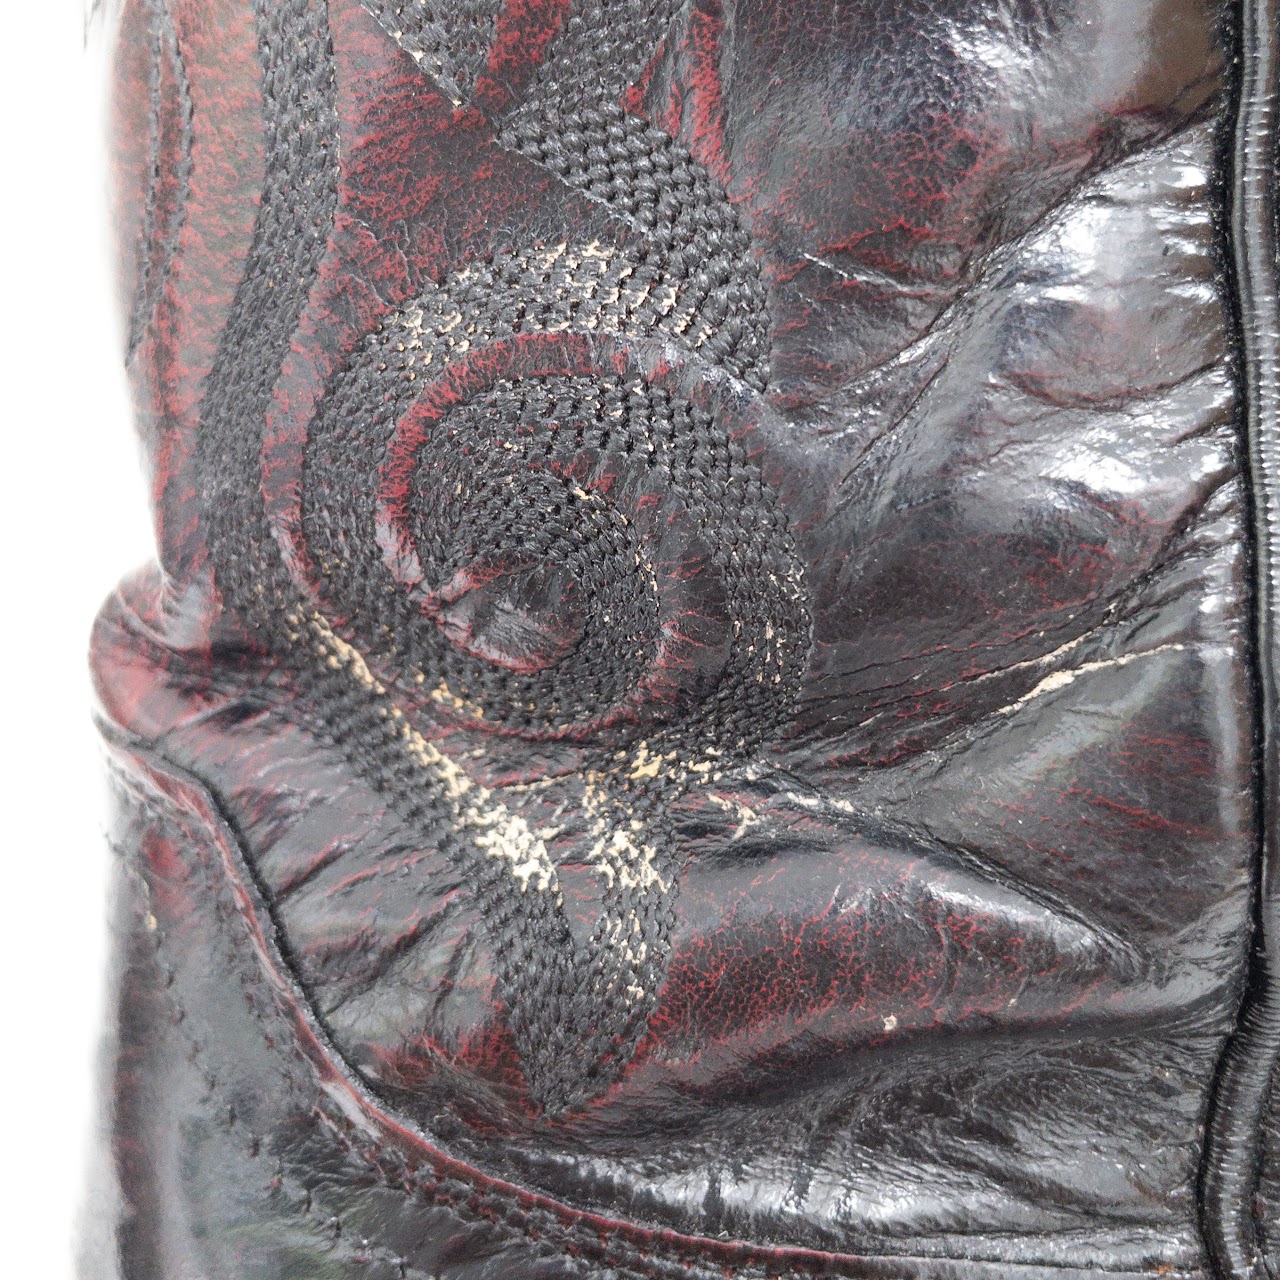 Lucchese Western Boots